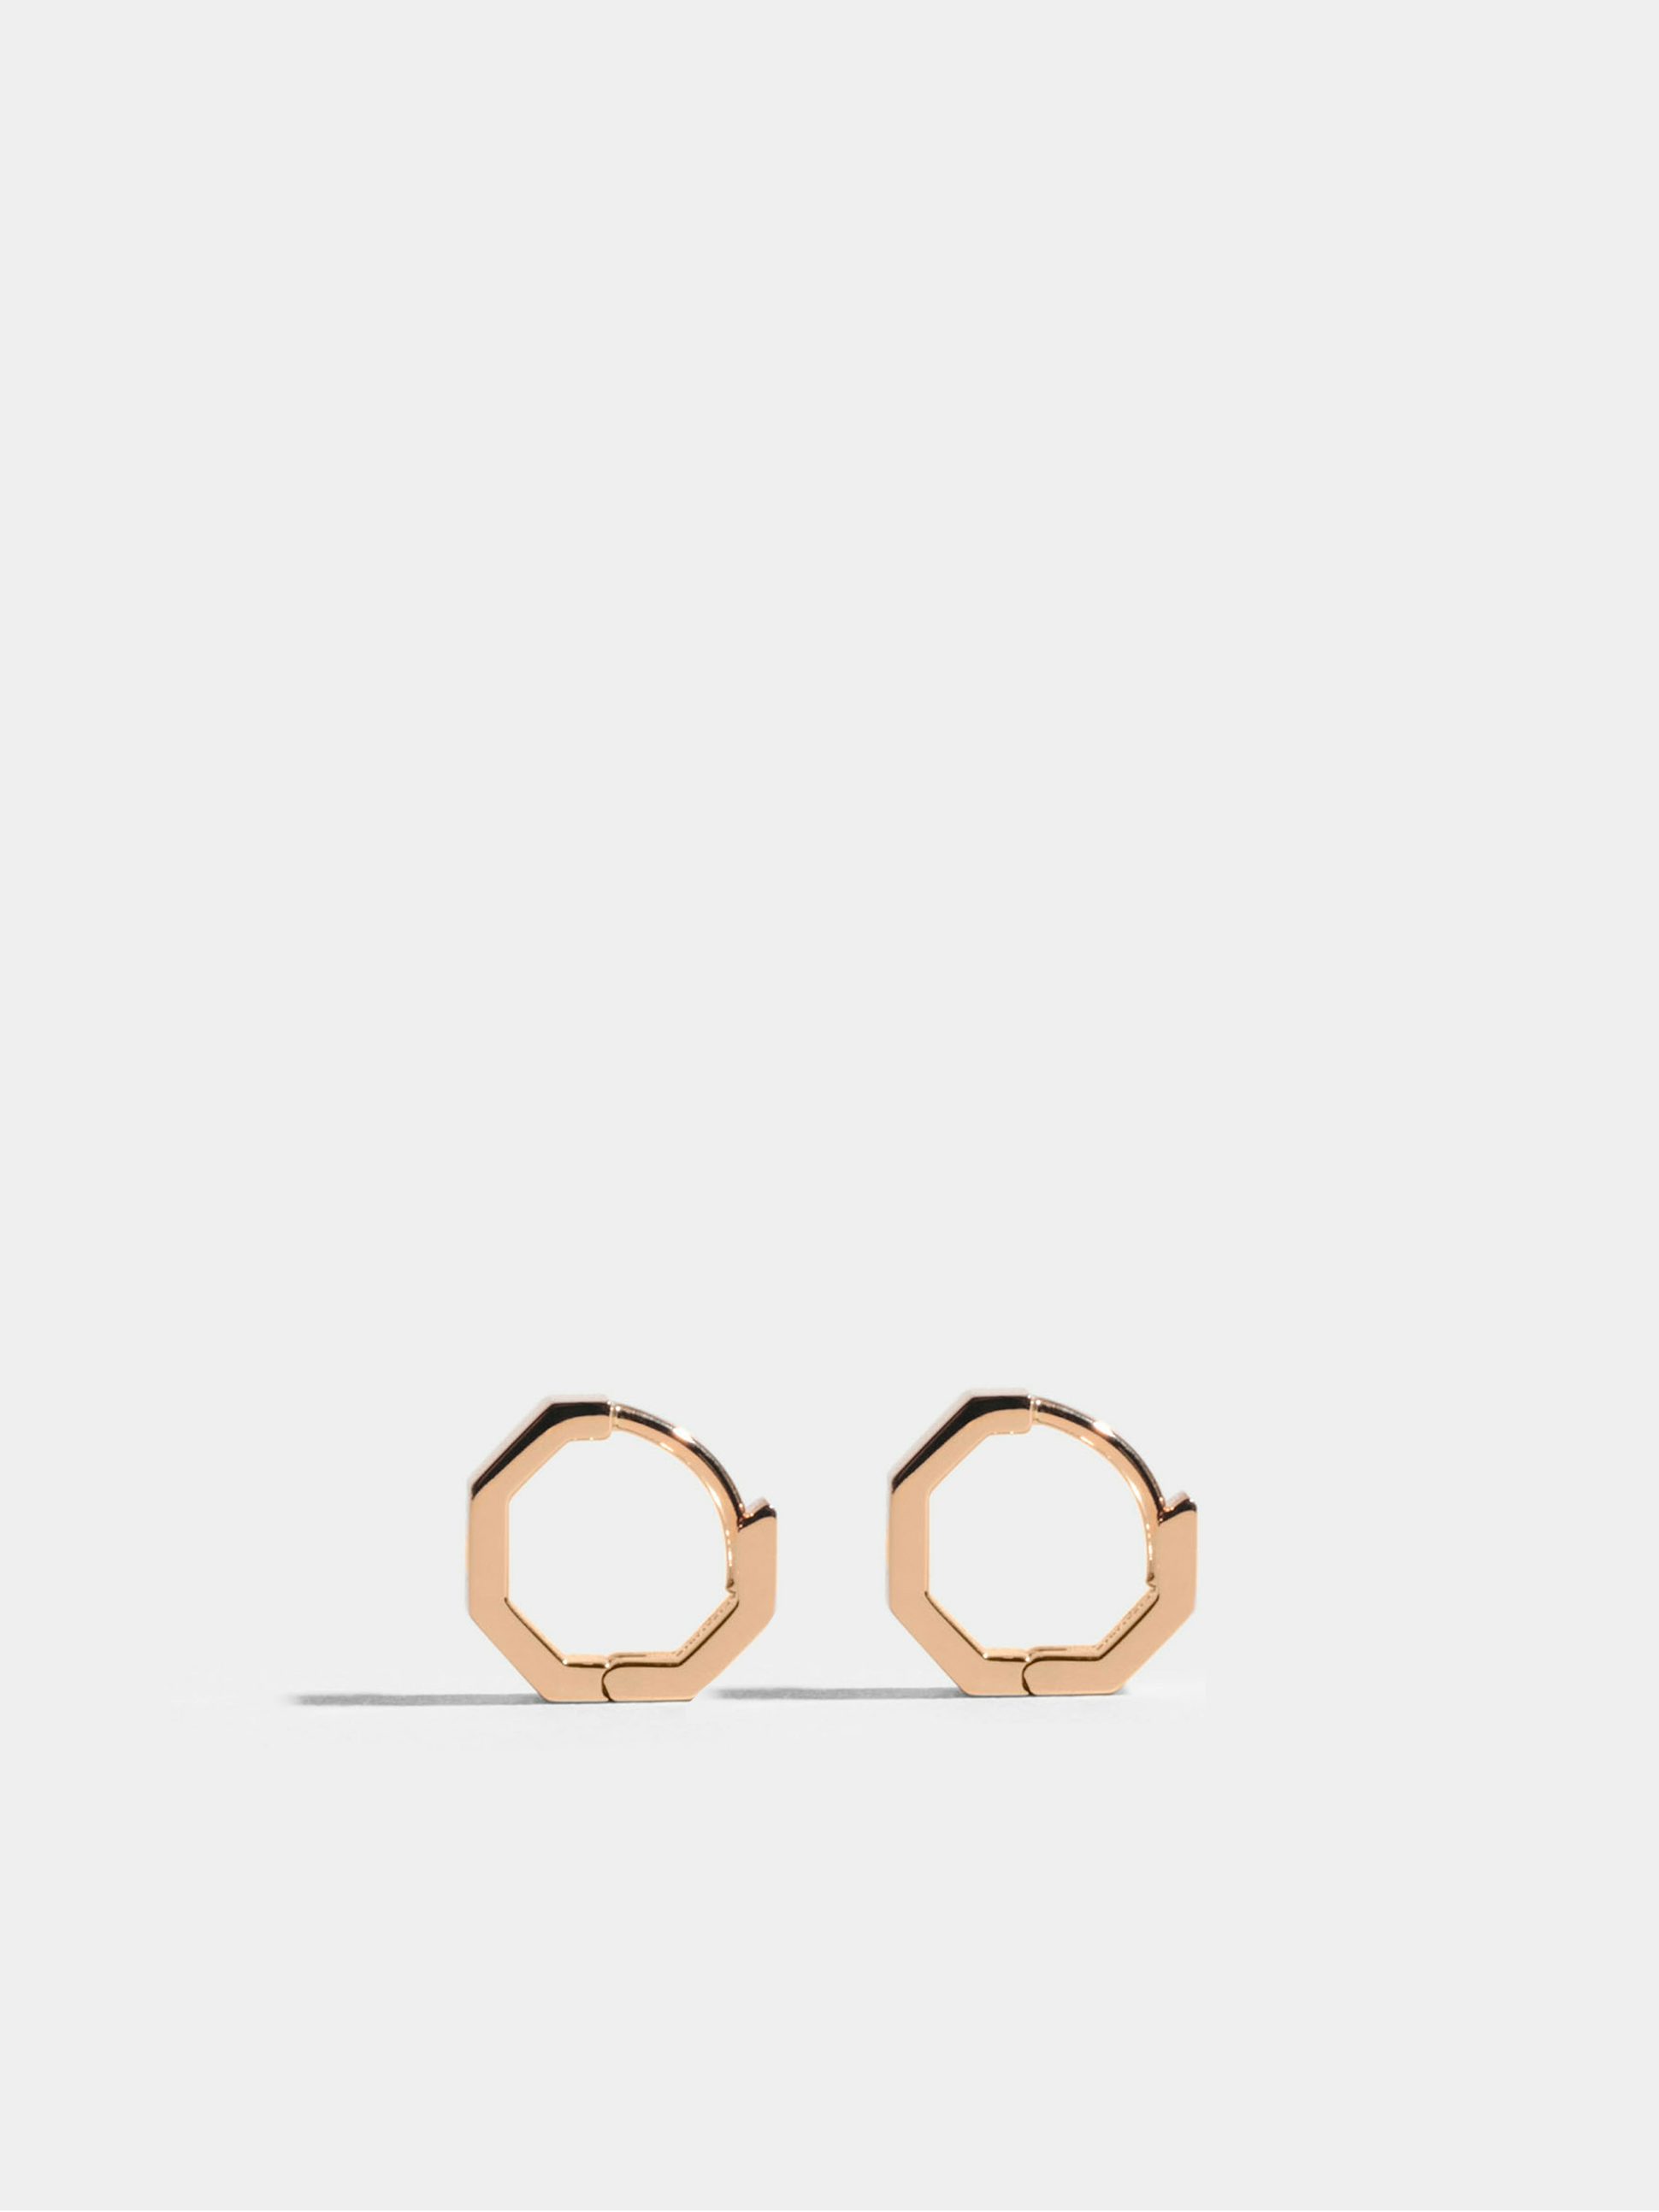 Octogone 10mm earrings in 18k Fairmined ethical rose gold, the pair.